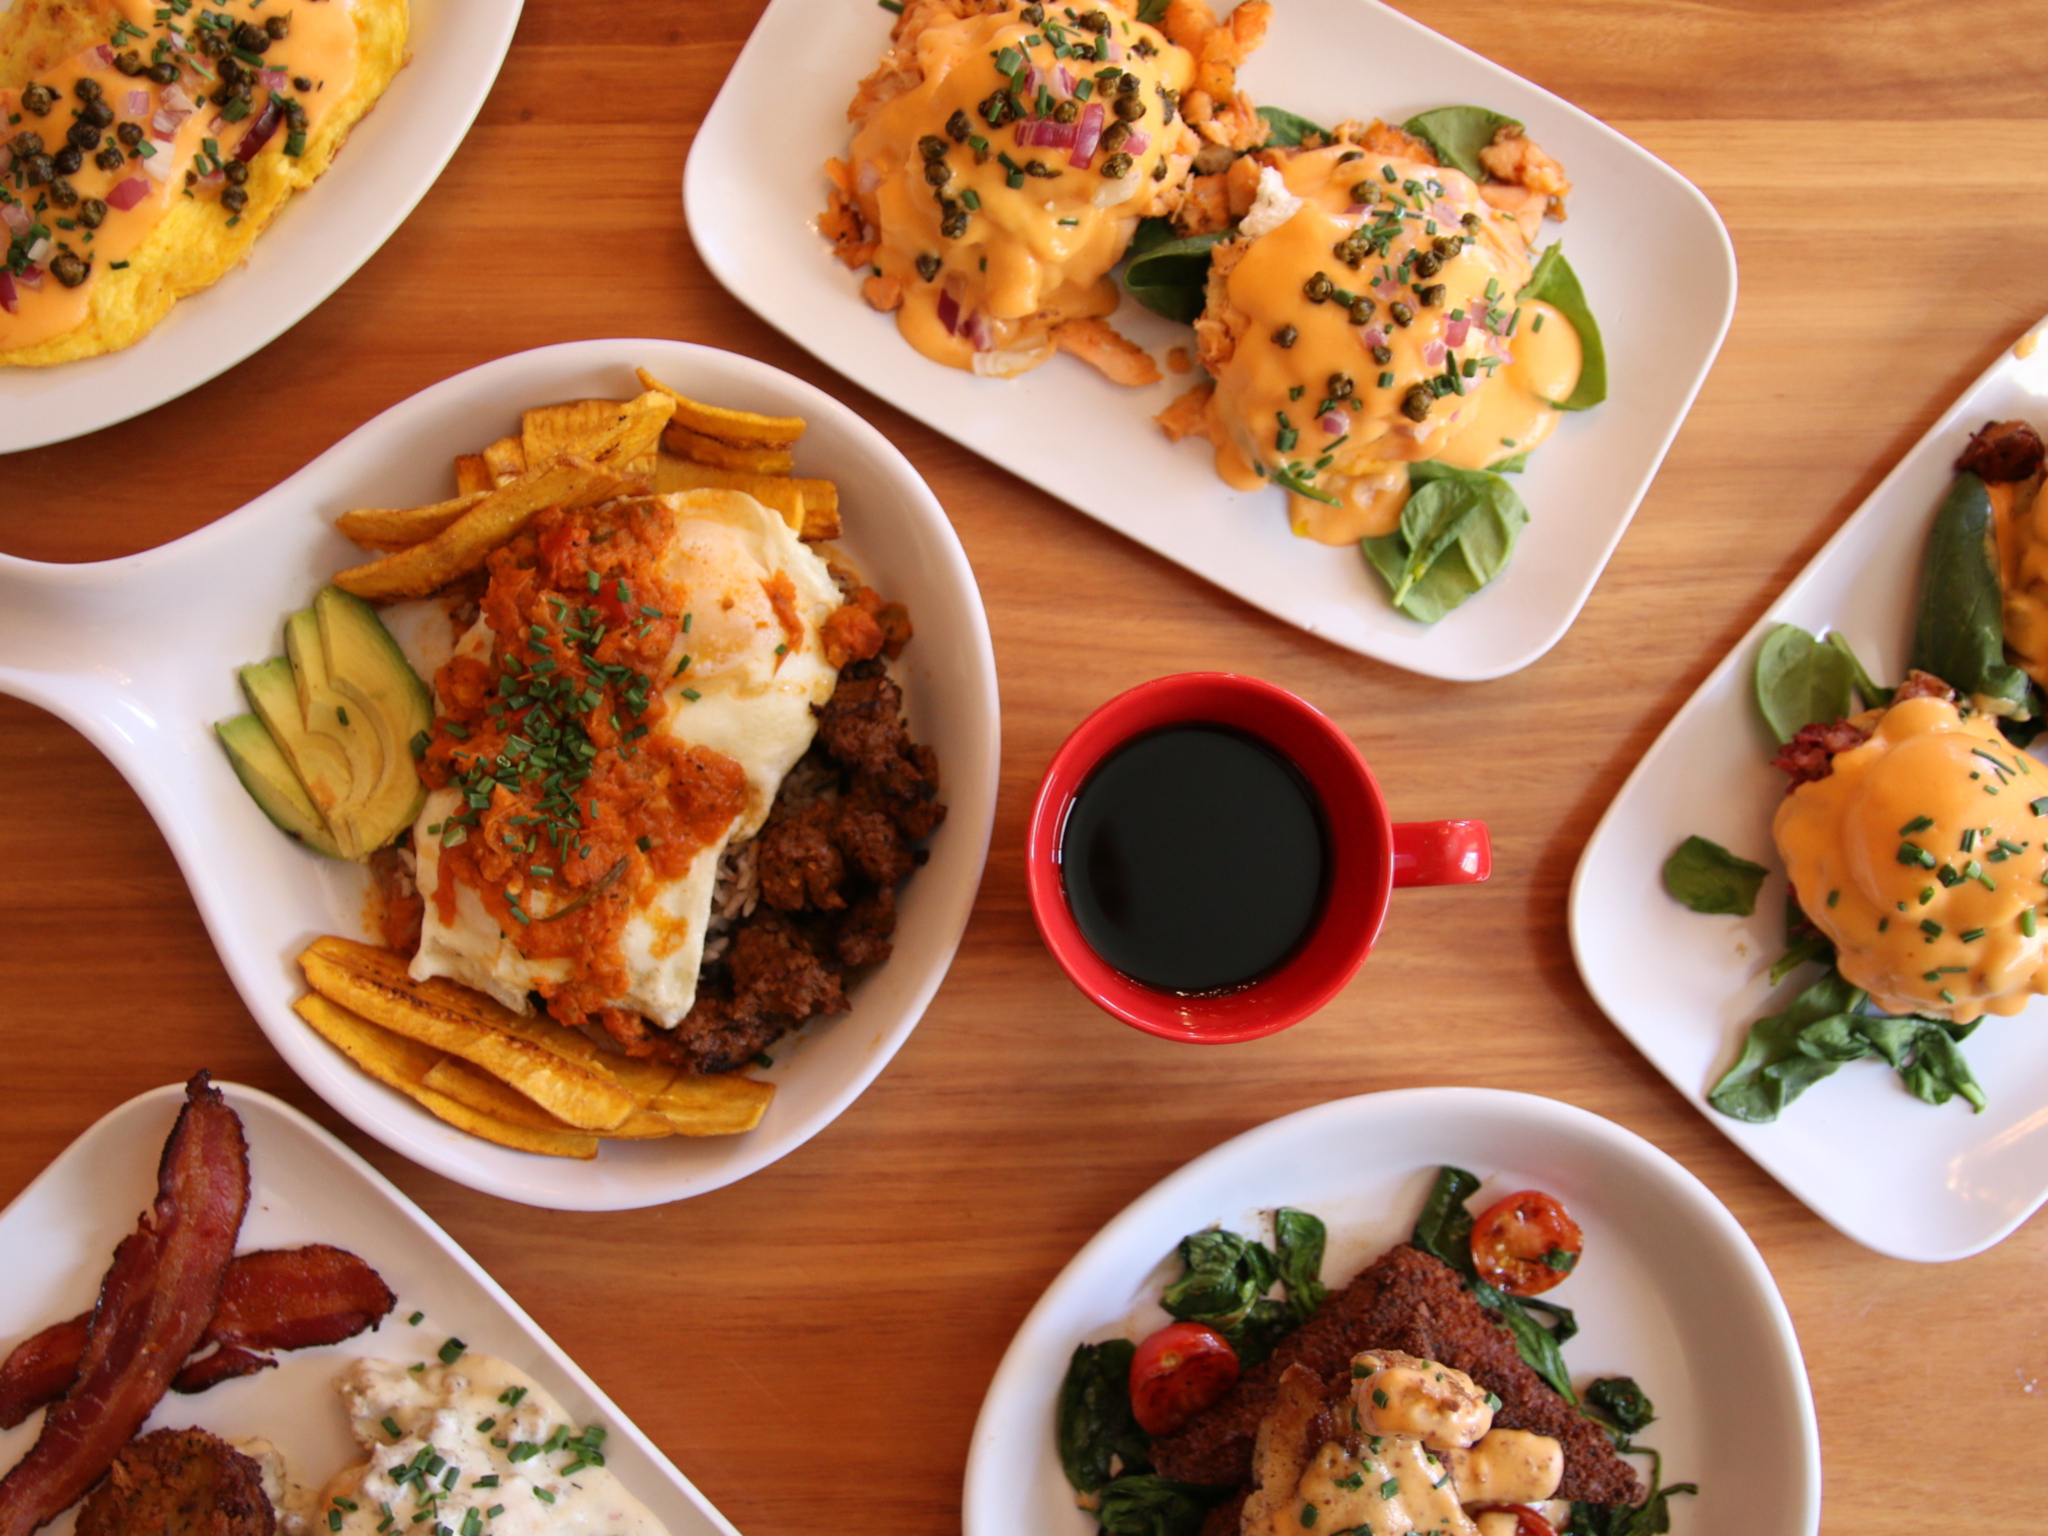 Cater a Special Occasion: Tips to Make It Easier - Brunch Cafe